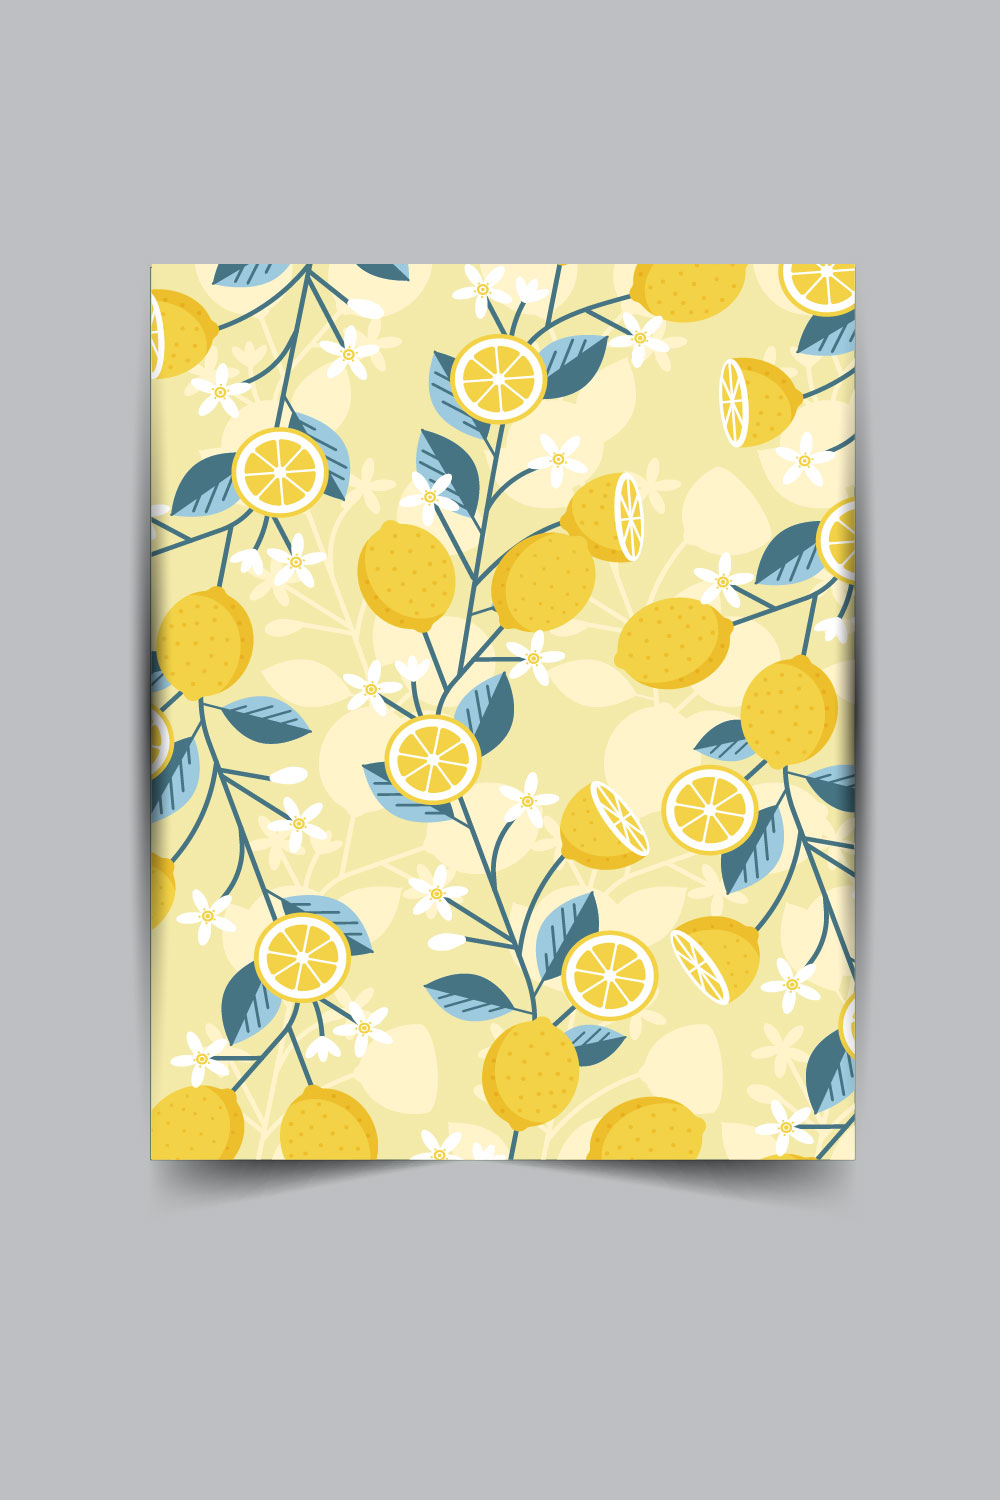 I Will Design Seamless Repeat Vector Patterns For Textile Prints pinterest preview image.